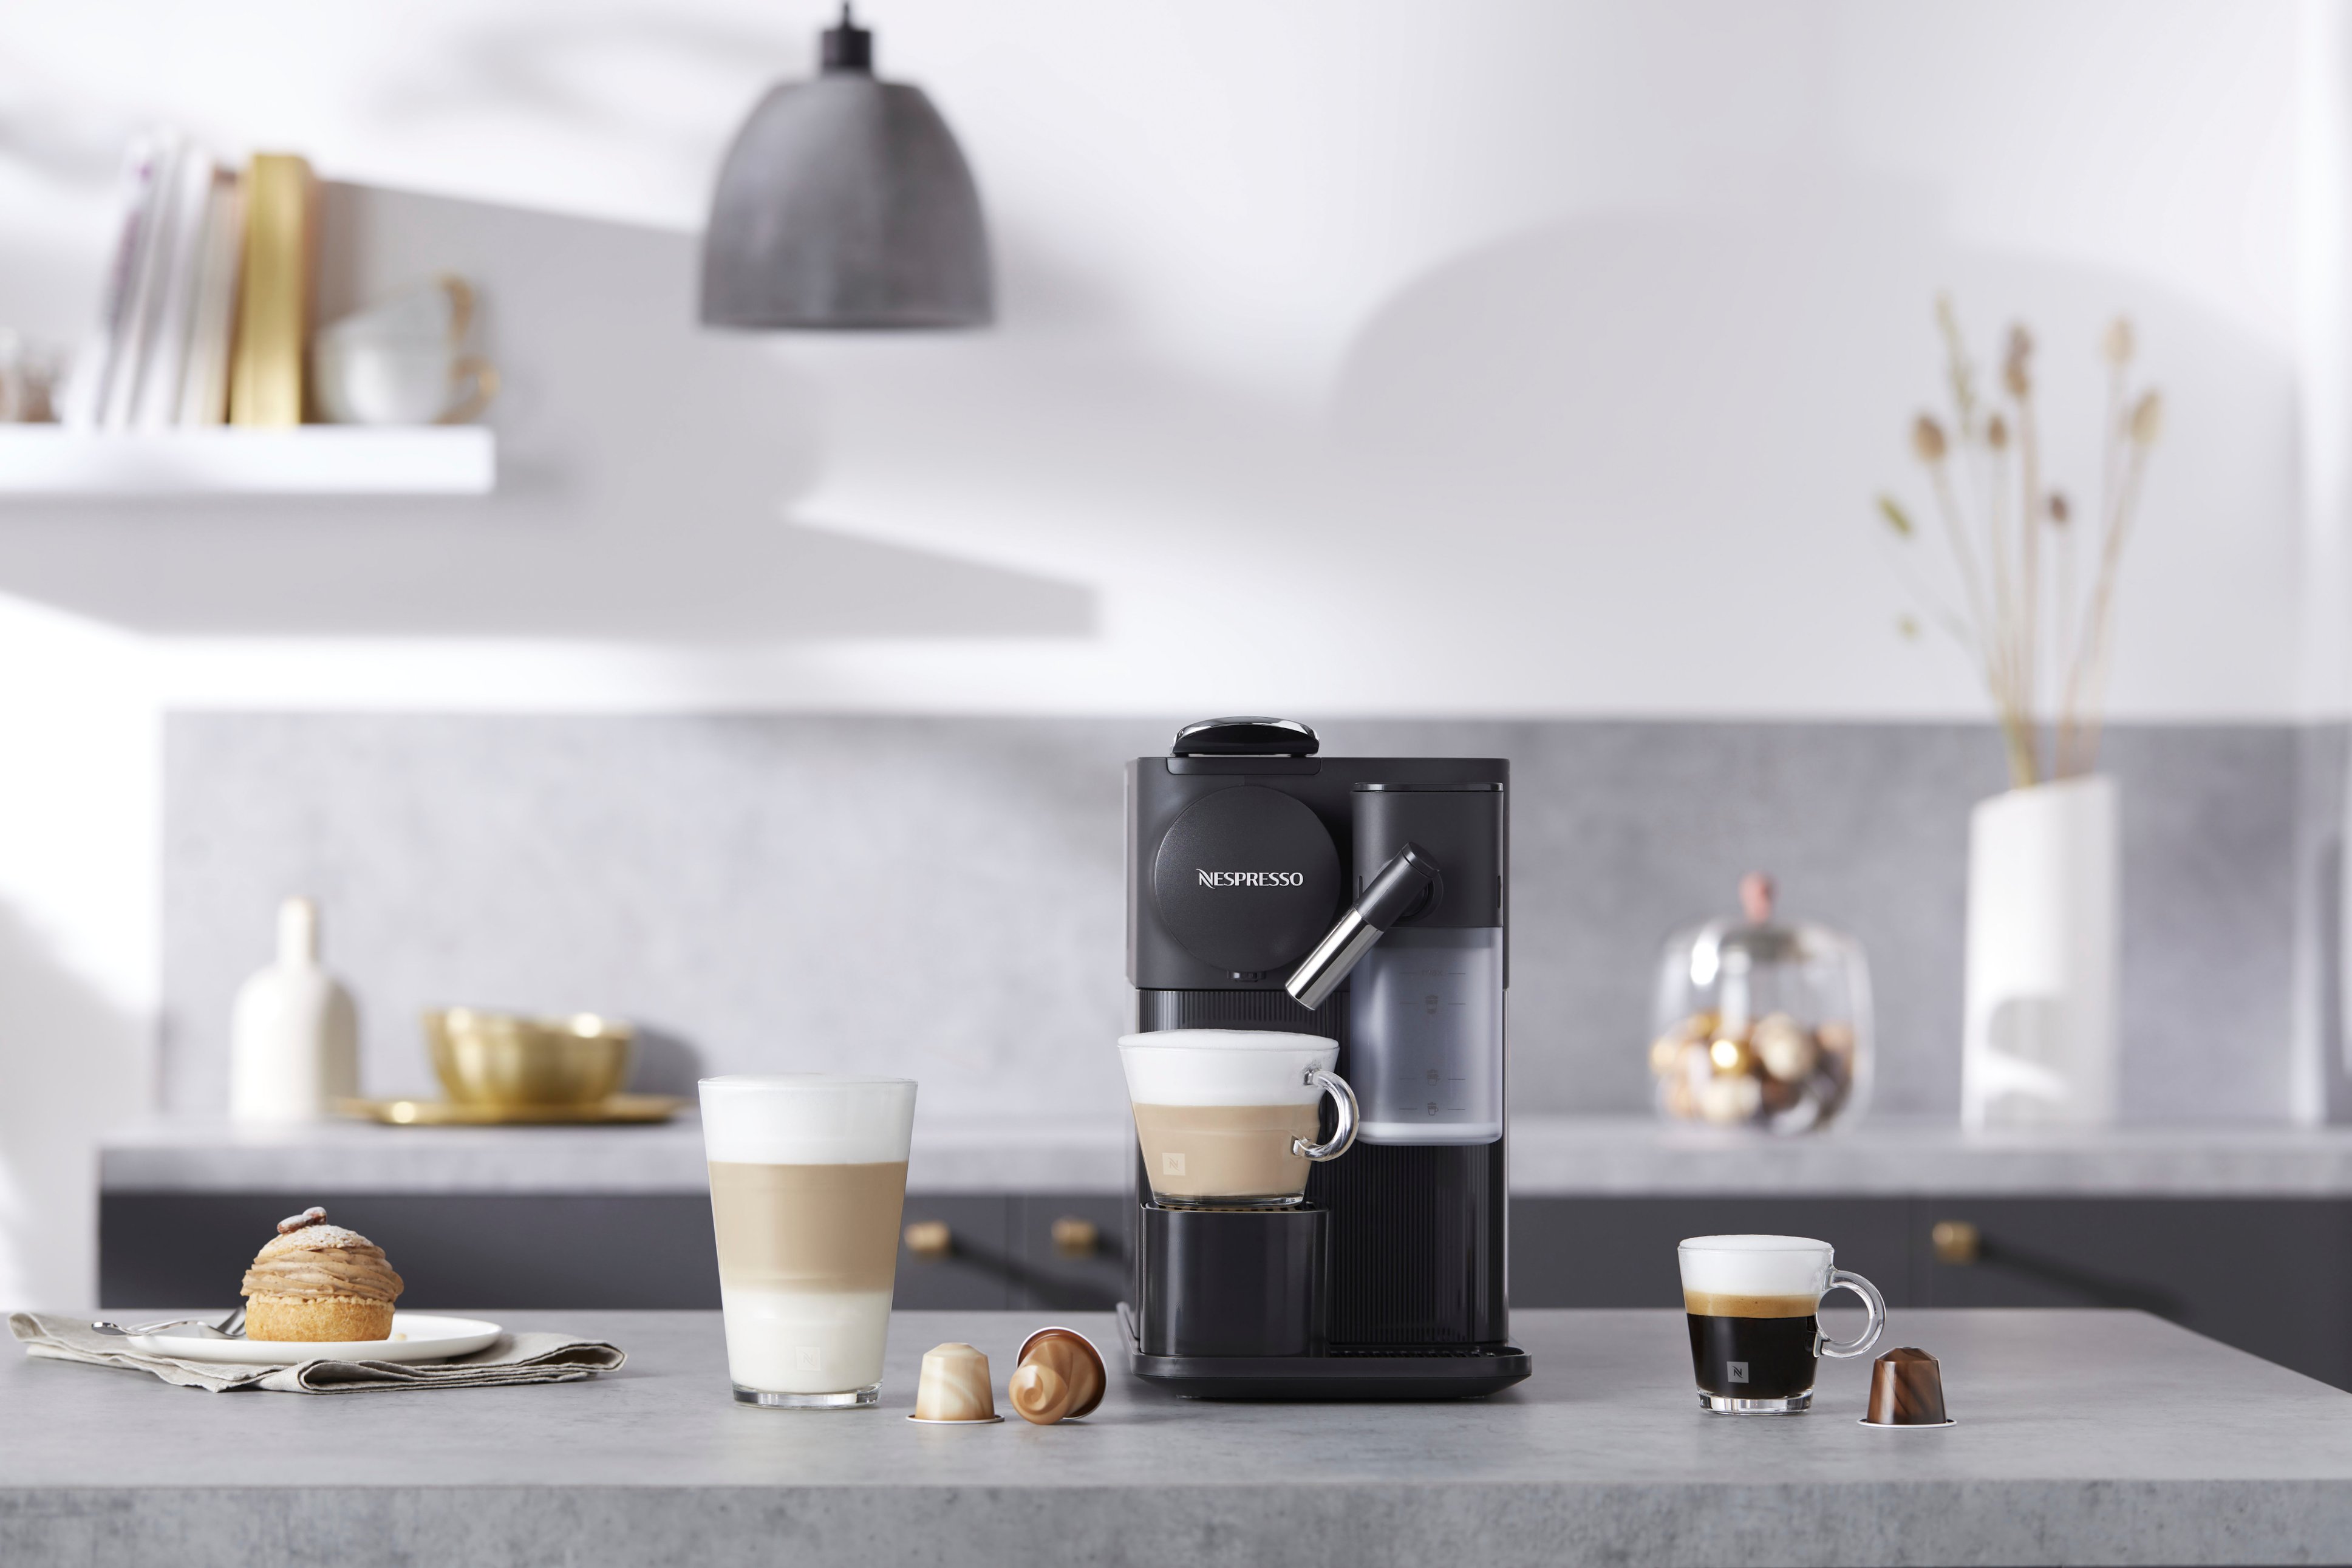 Nespresso Lattissima Touch Espresso Machine with Milk Frother by De'Longhi,  Washed Black